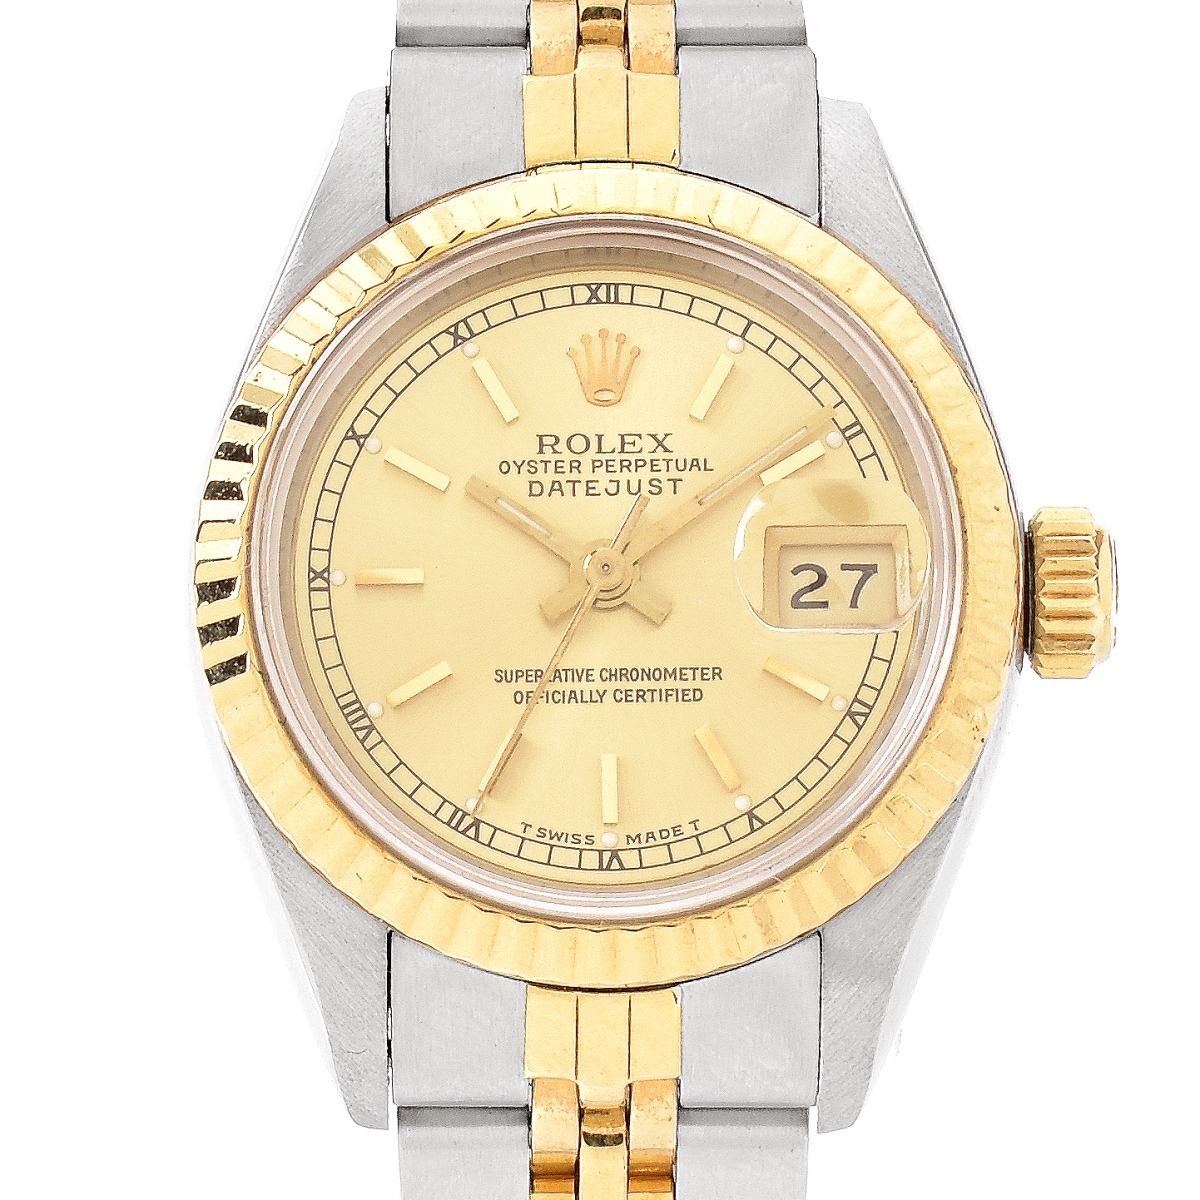 Lady's Rolex Date Just Watch